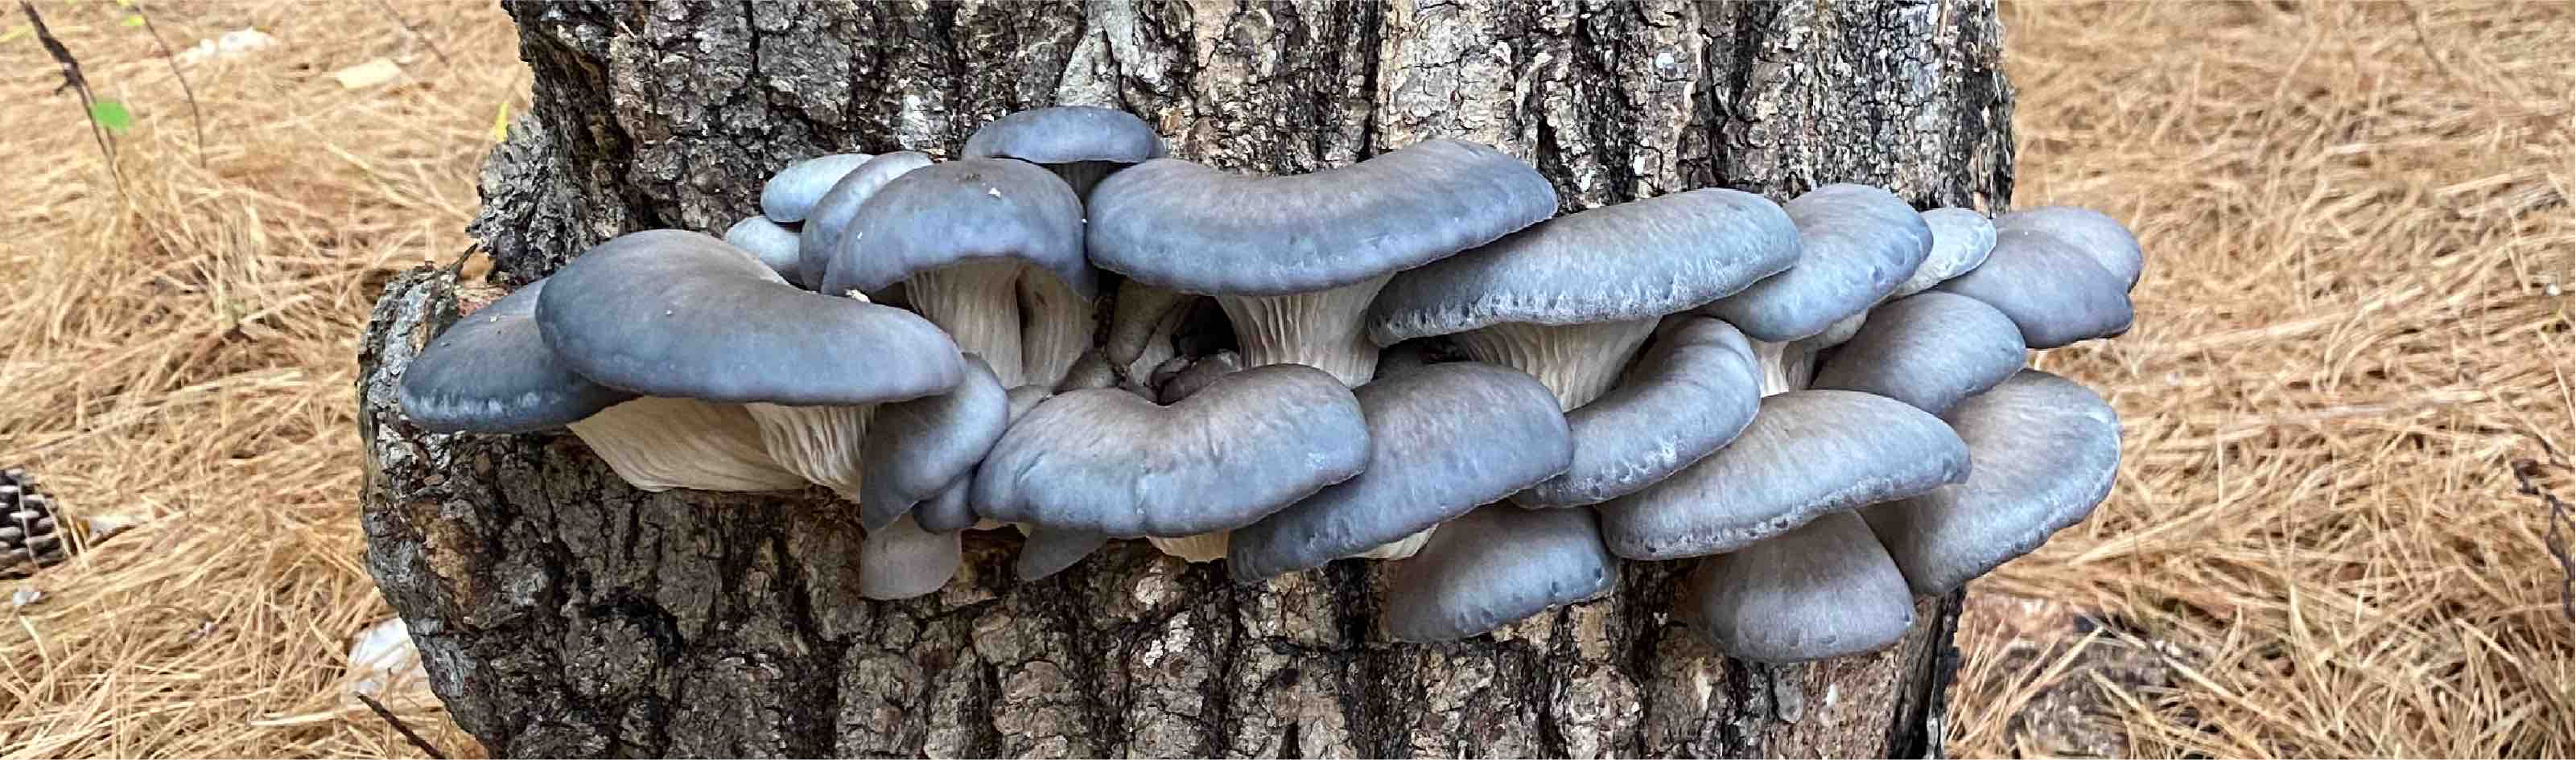 blue oyster growing on logs